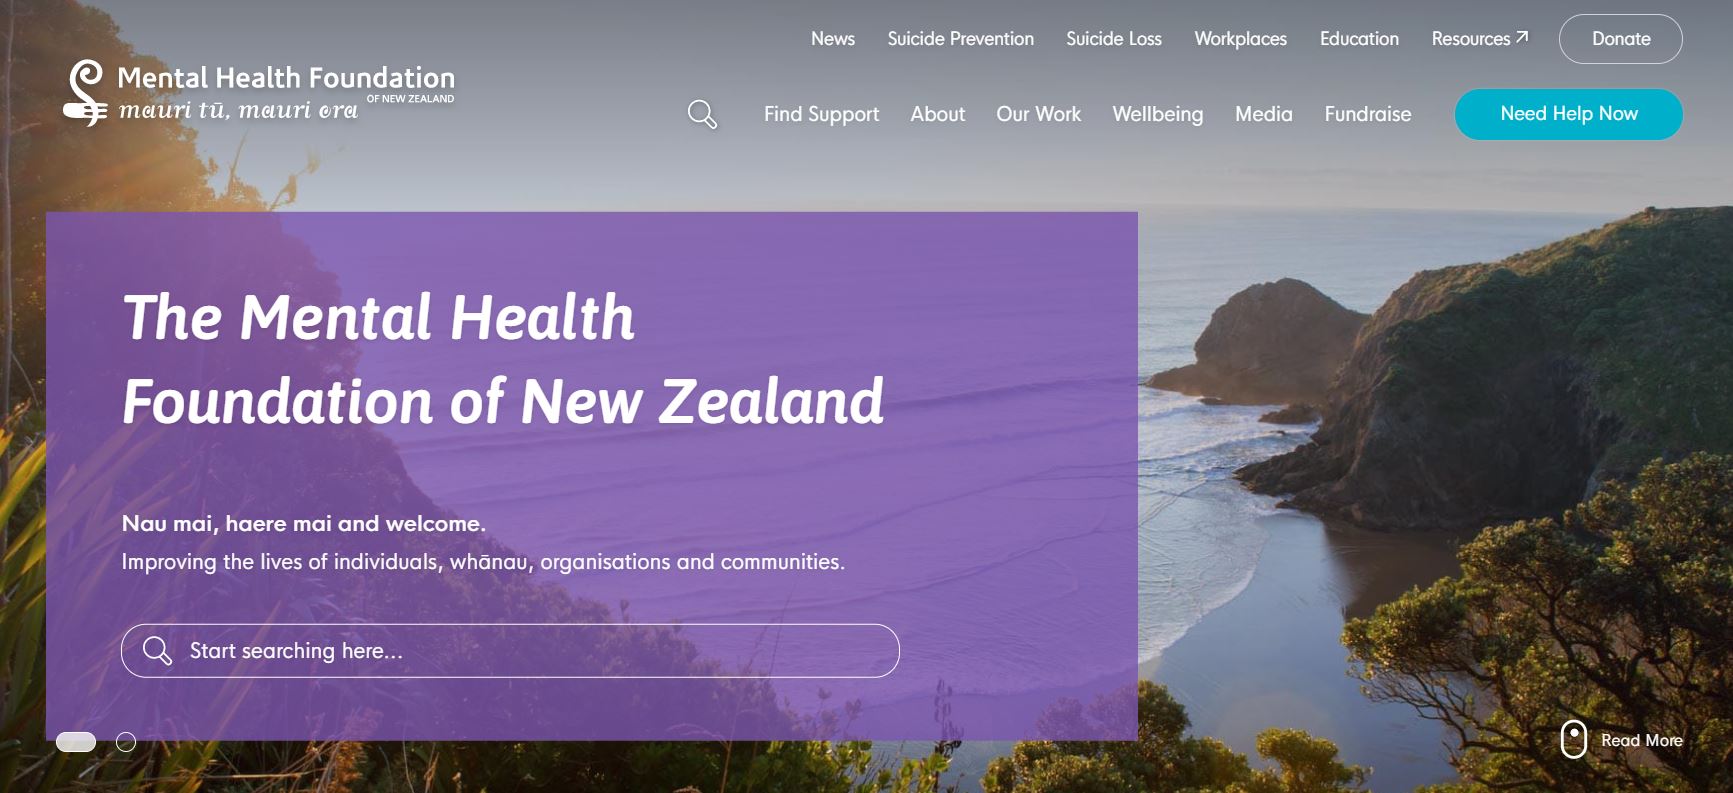 The Mental Health Foundation of New Zealand website.